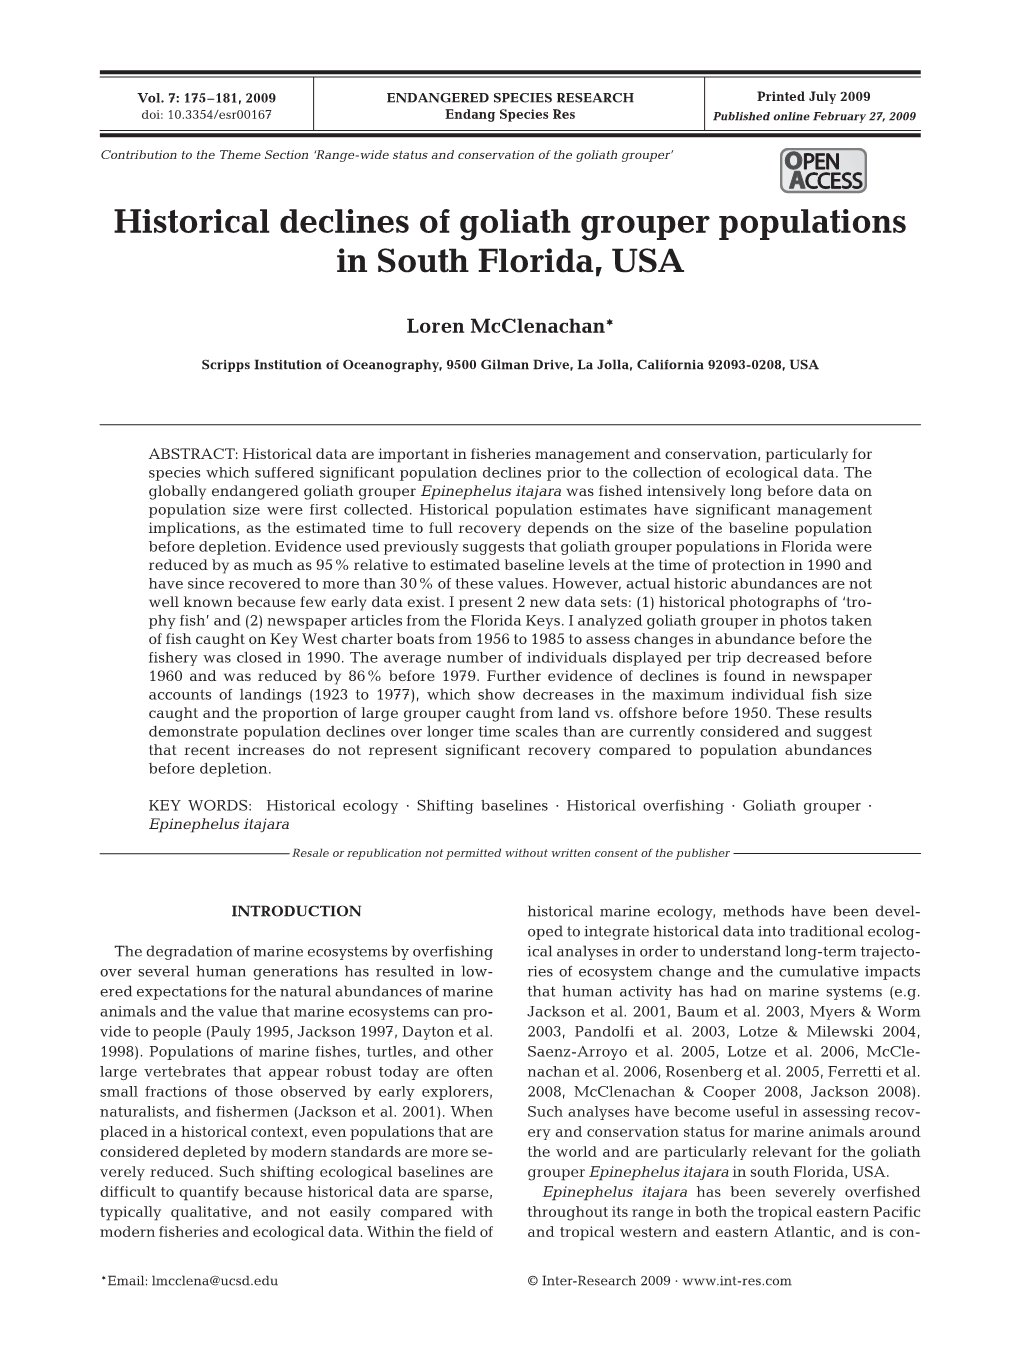 Historical Declines of Goliath Grouper Populations in South Florida, USA